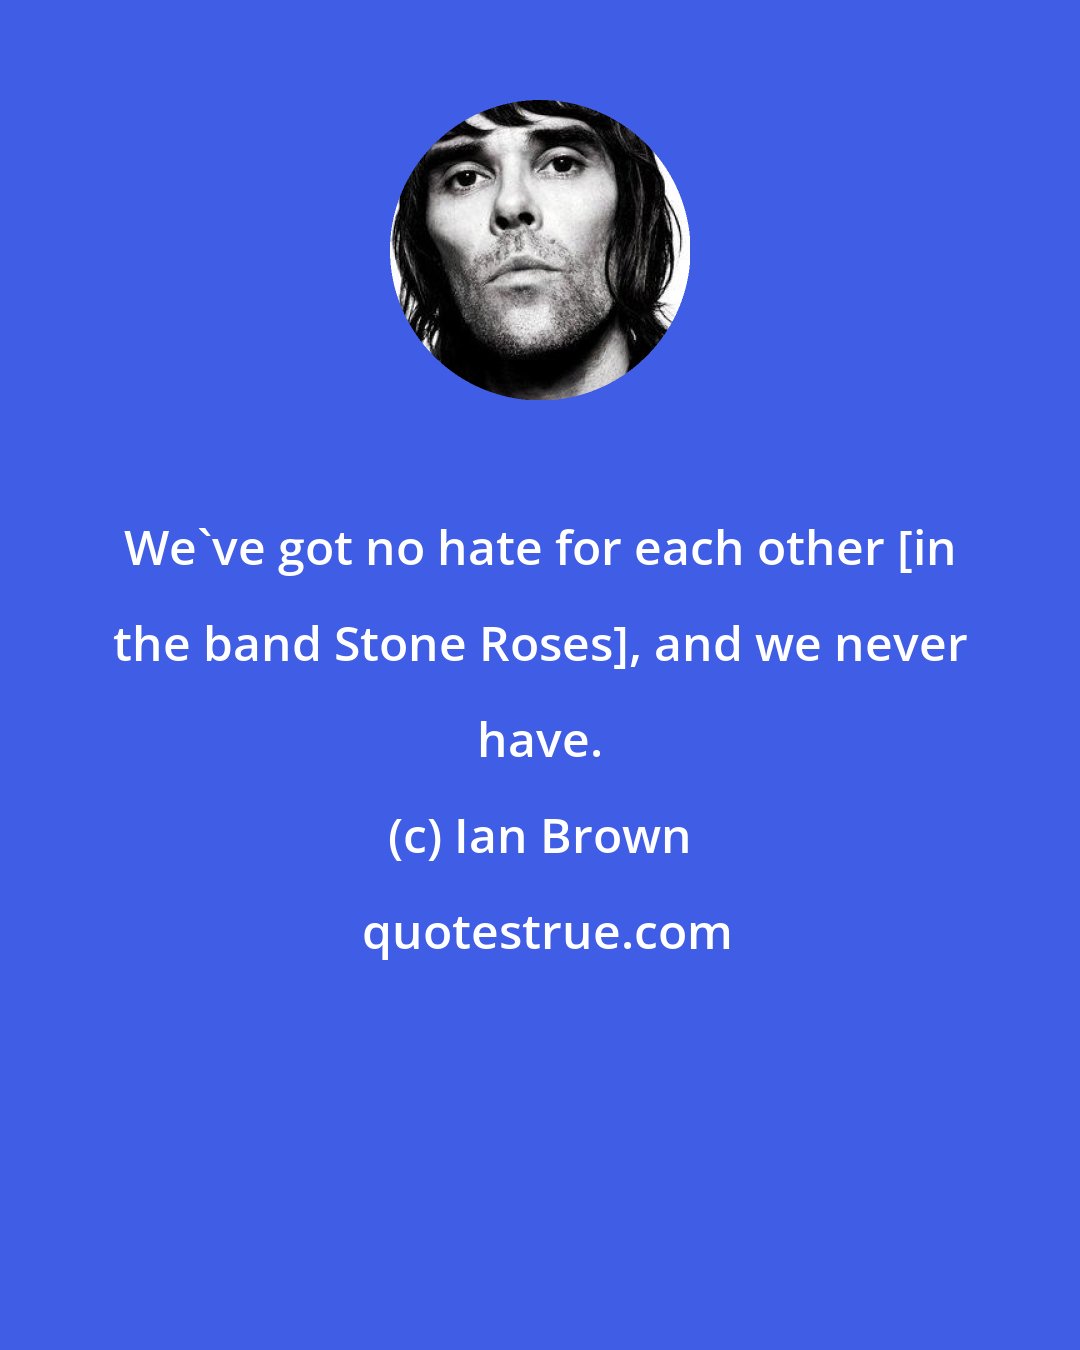 Ian Brown: We've got no hate for each other [in the band Stone Roses], and we never have.